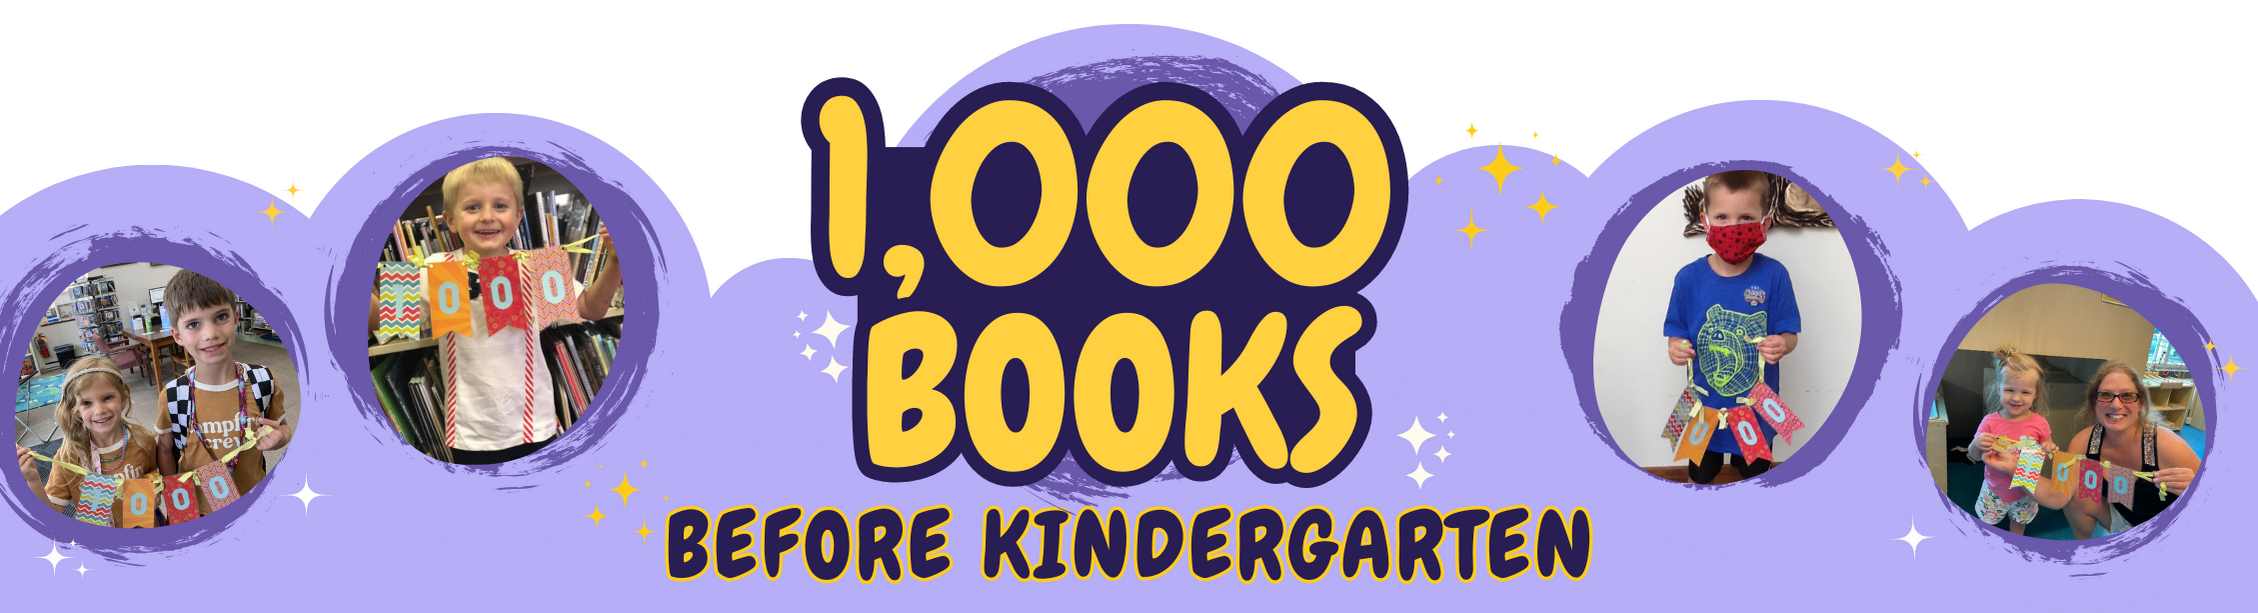 purple clouds with 1,000 books before kindergarten in bubble letters and two circles on each end featuring a child holding a 1,000 books banner in each and smiling